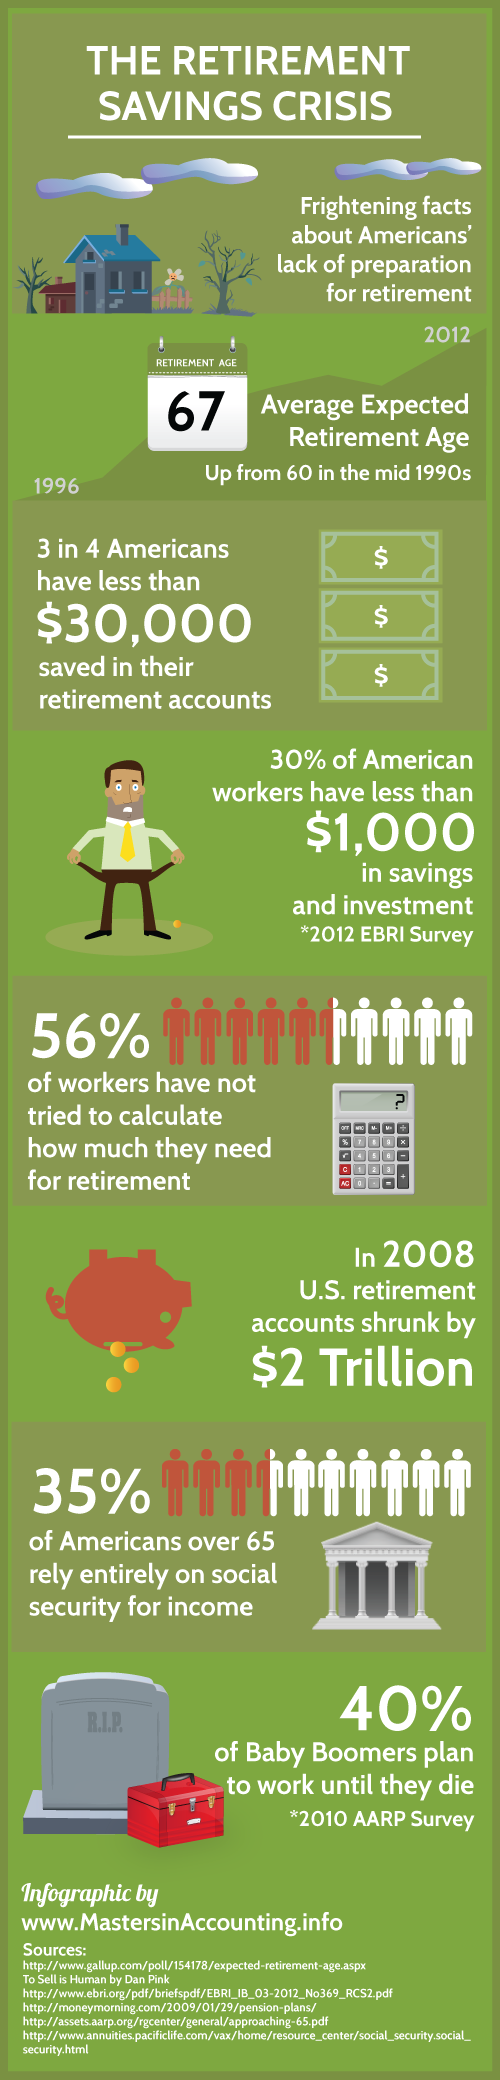 Infographic: 8 Retirement tips that will ensure a comfortable retirement